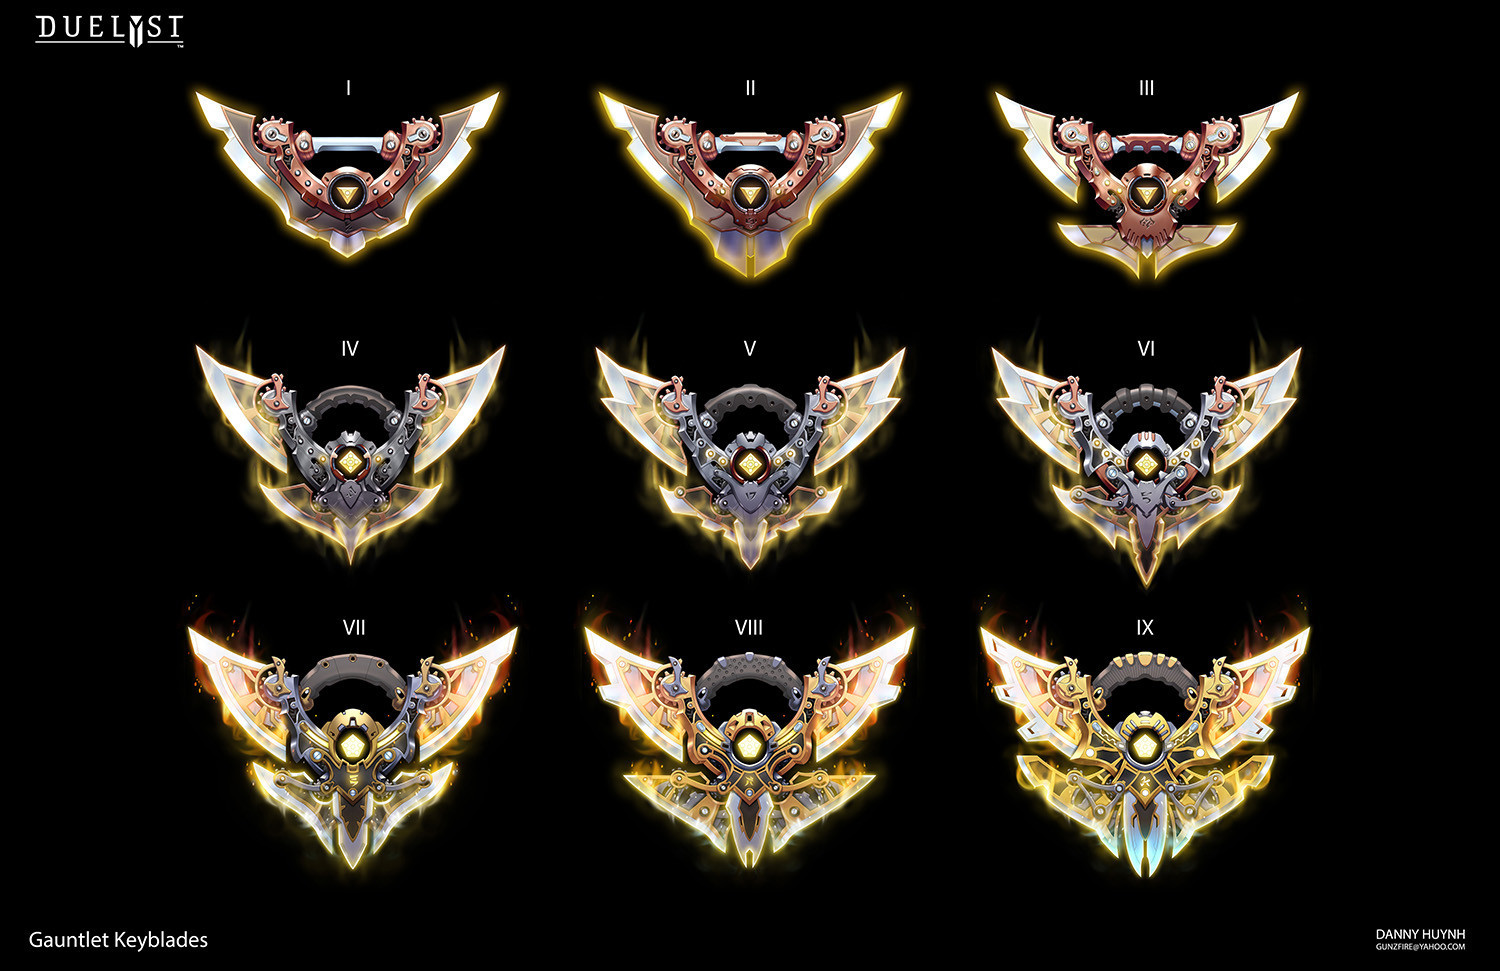 Keyblades represent 9 rank levels a player can achieve in Gauntlet.